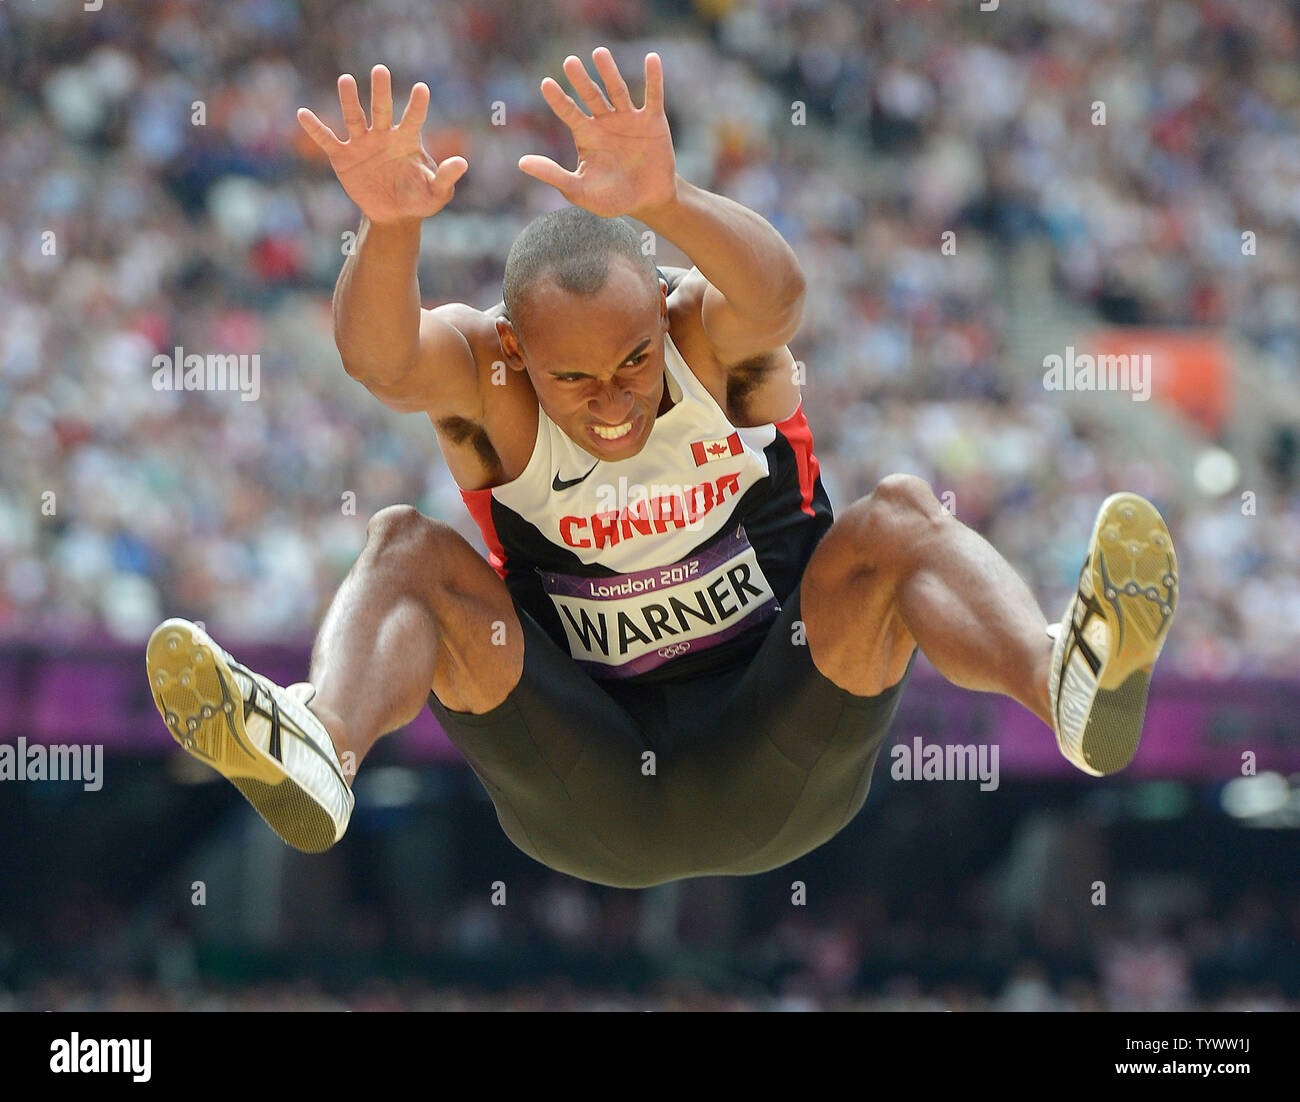 Damian Warner of Canada competes in the 